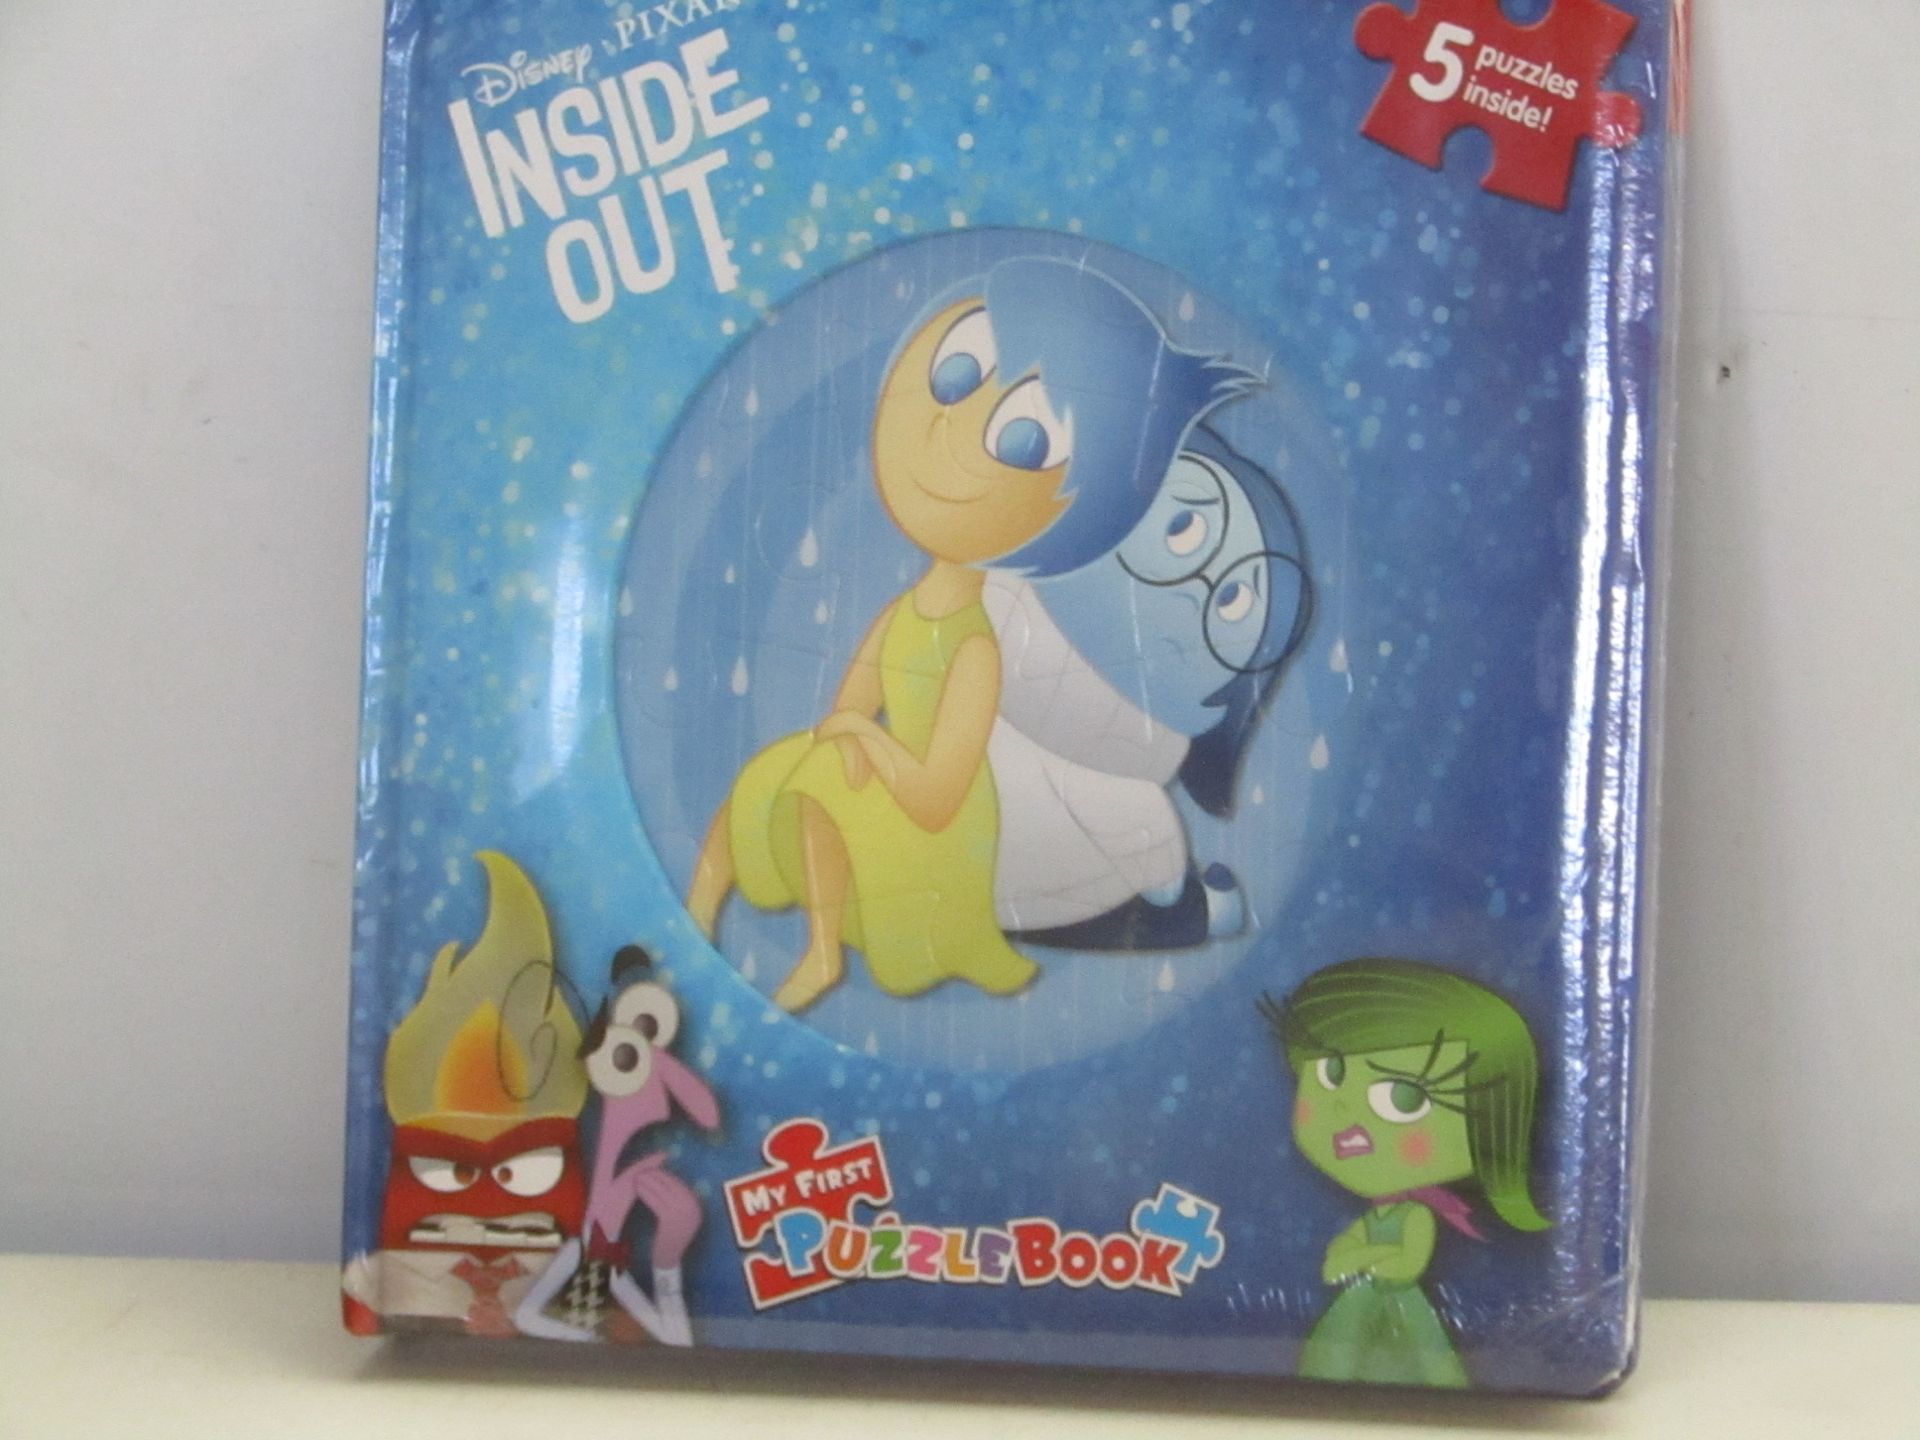 Box containing 12x Disney Pixar Inside Out Puzzle Books. New and boxed.